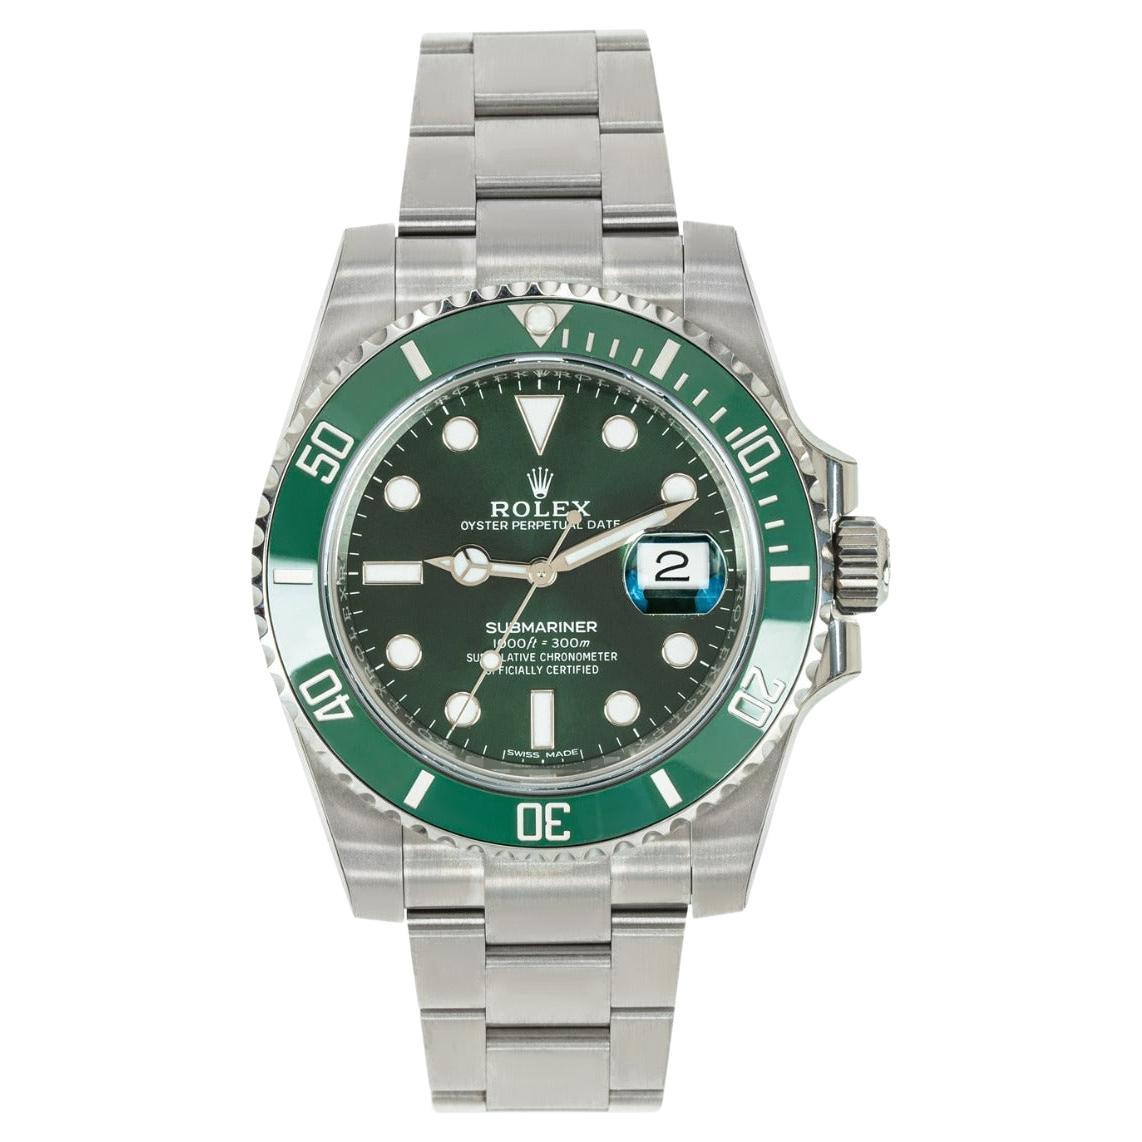 Is the green Submariner rare?